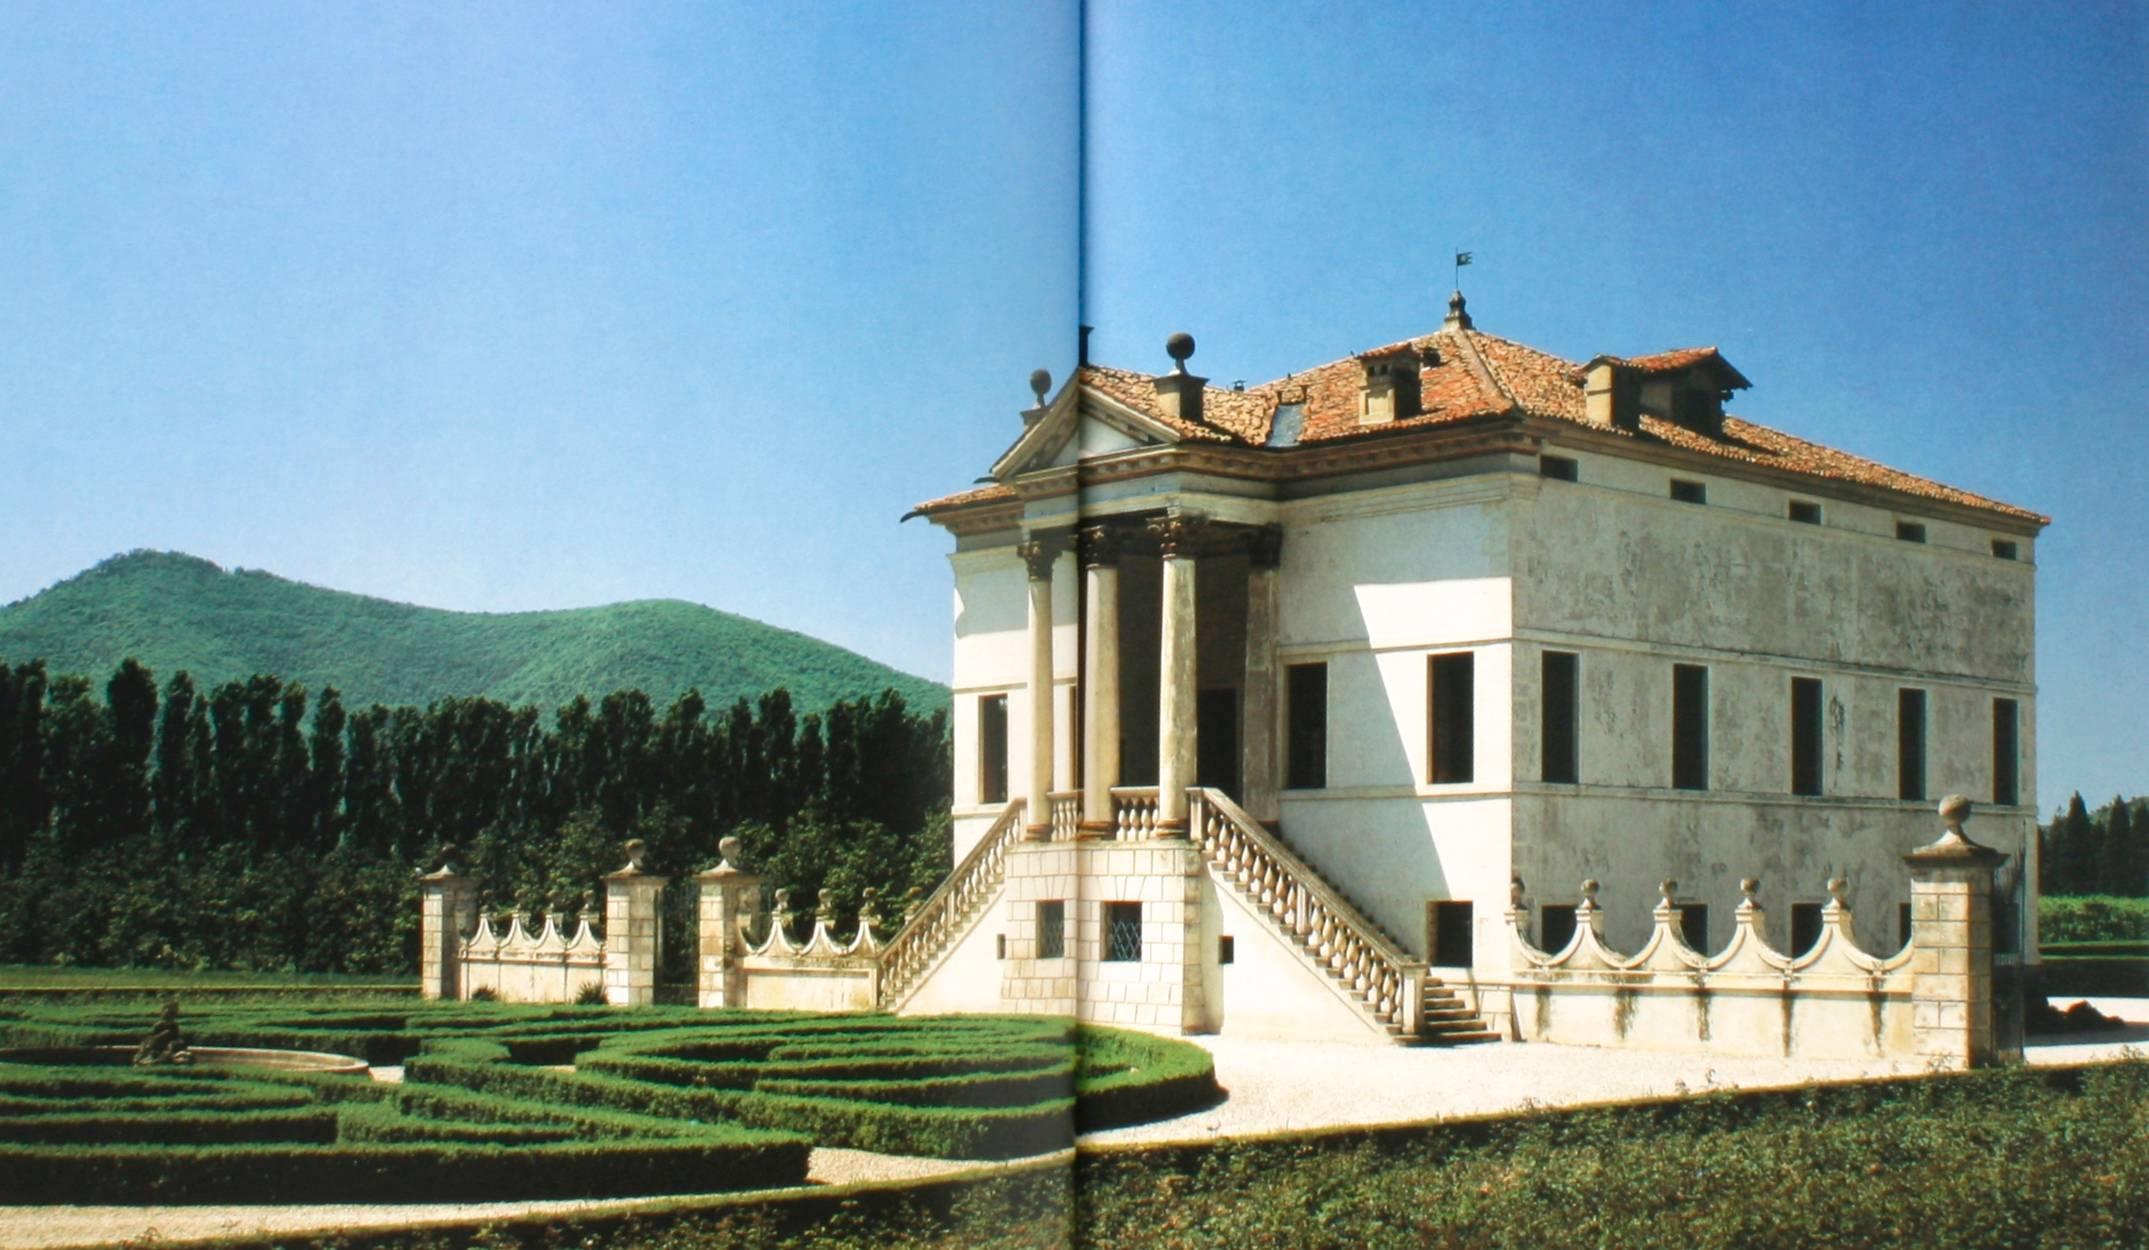 Villas of the Veneto, First Edition In Good Condition In valatie, NY